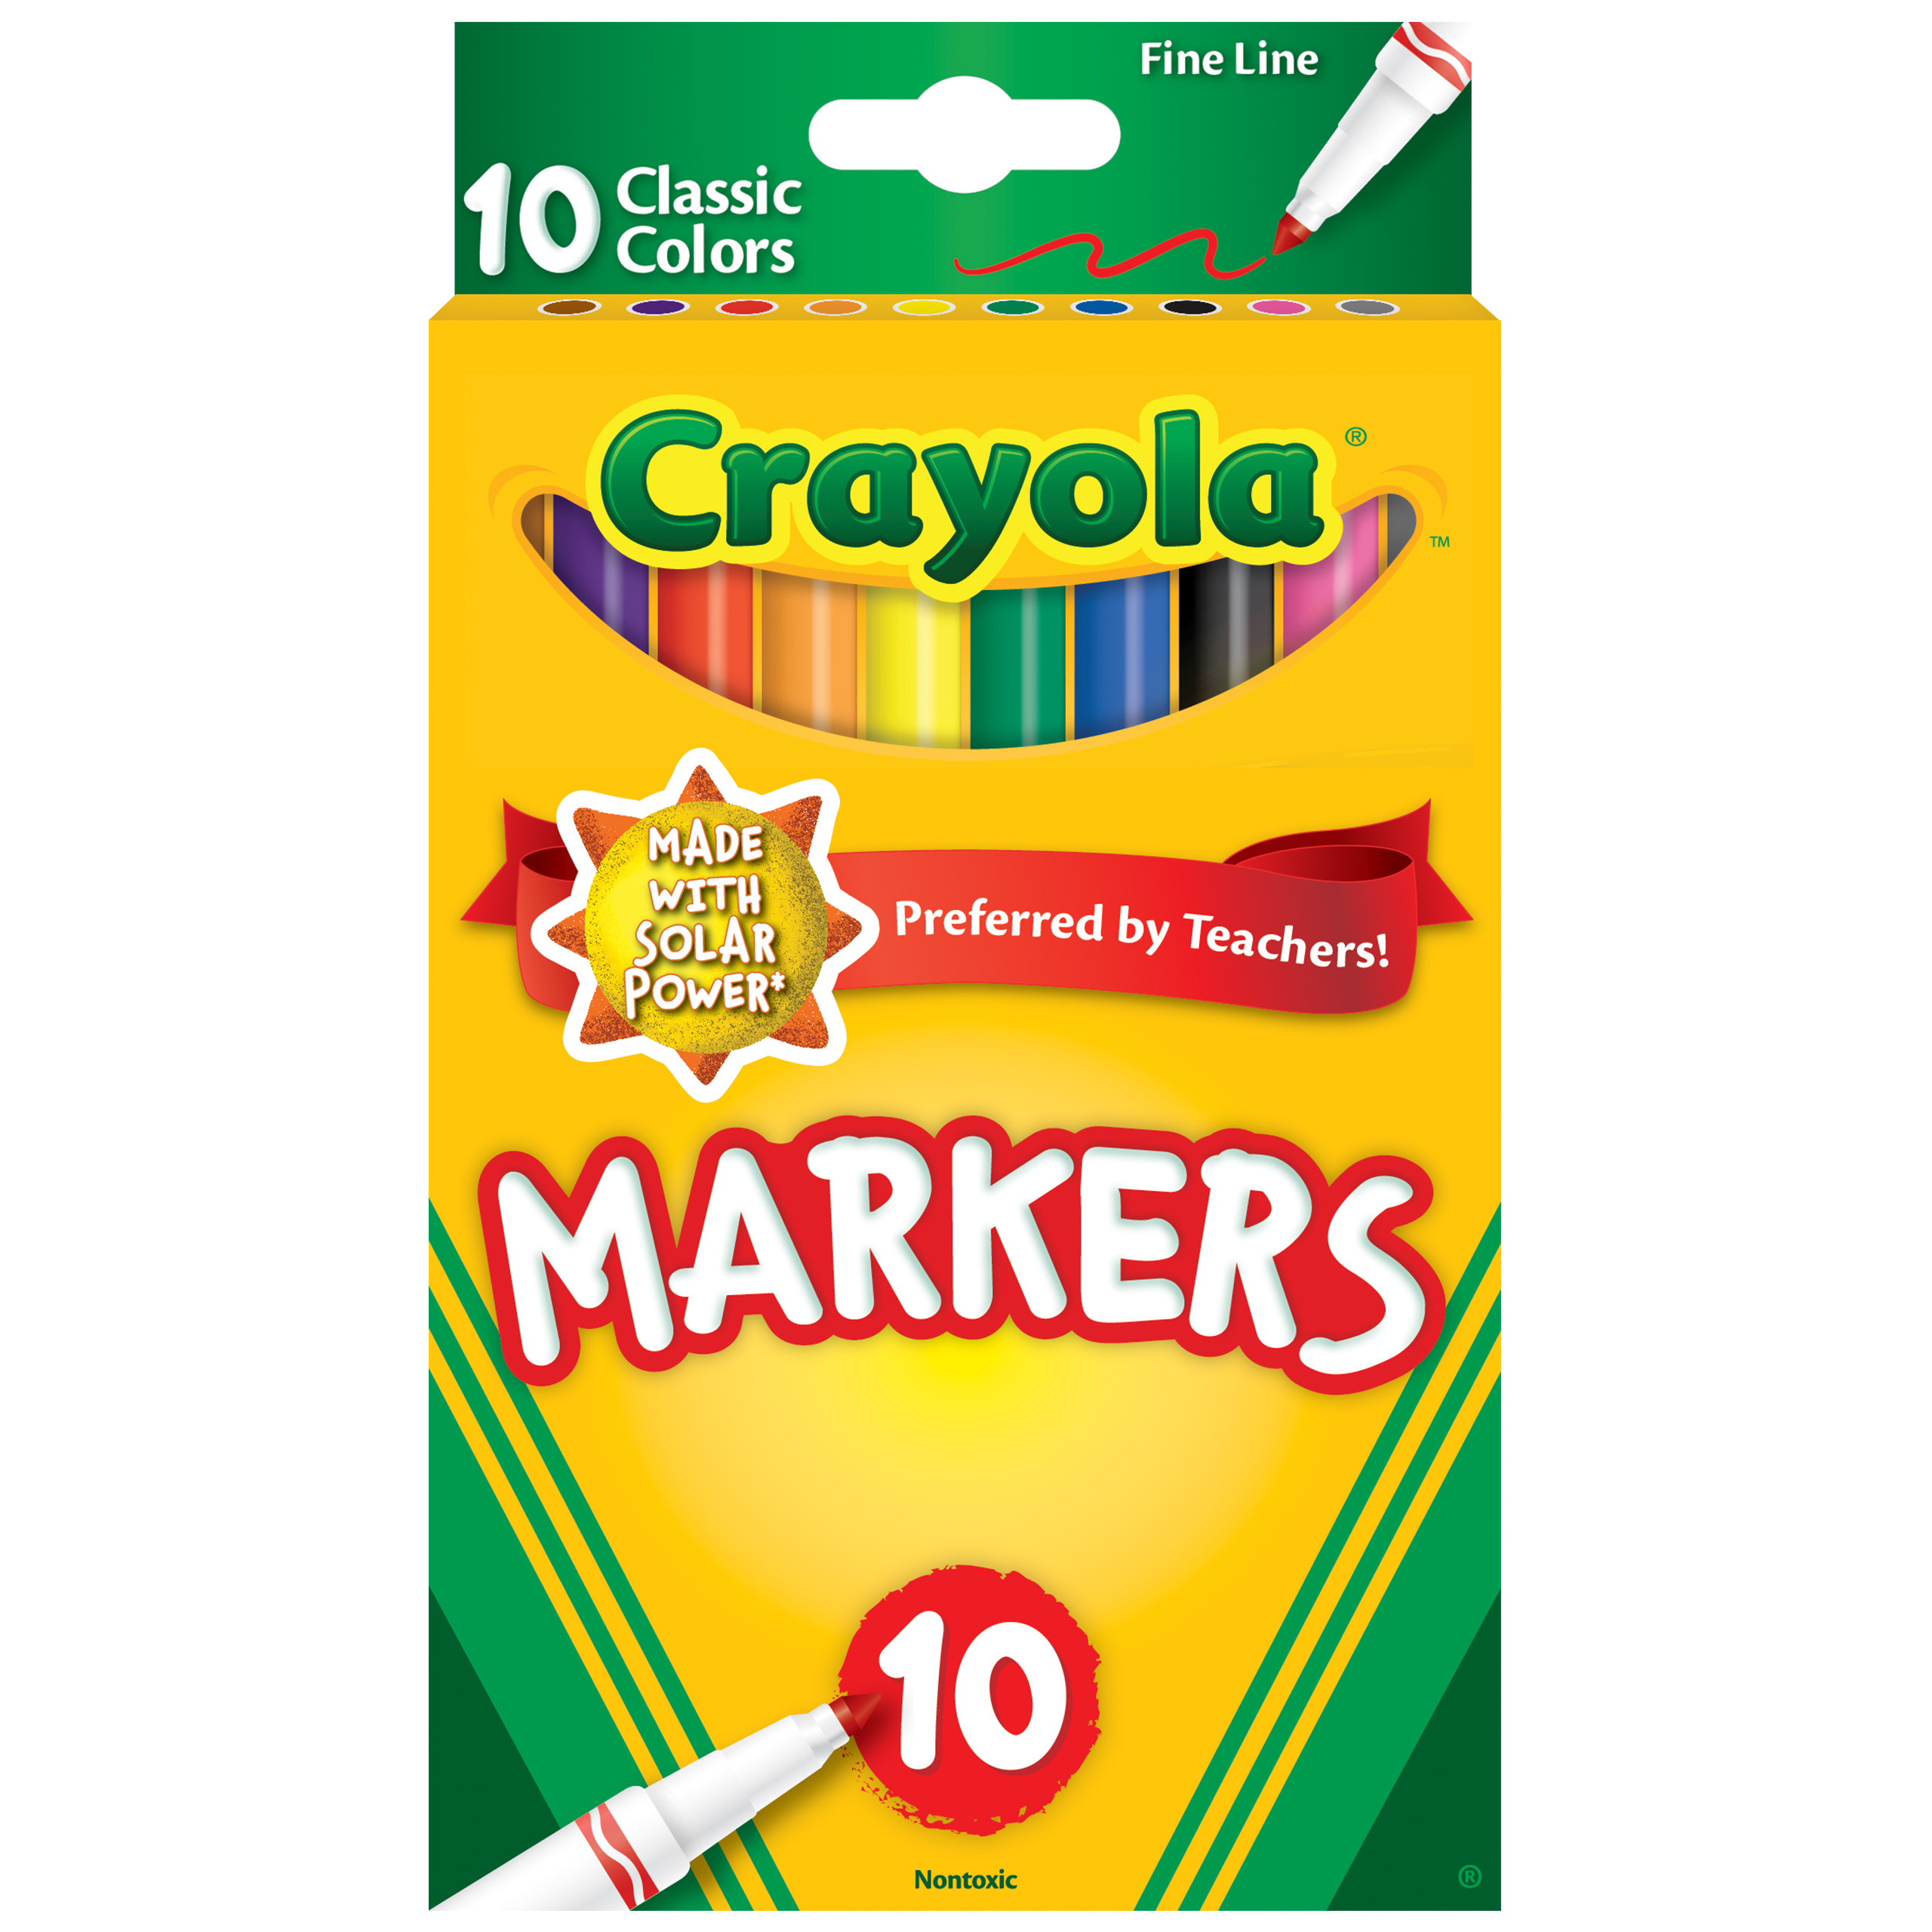 Crayola Markers - 10 Classic Colors